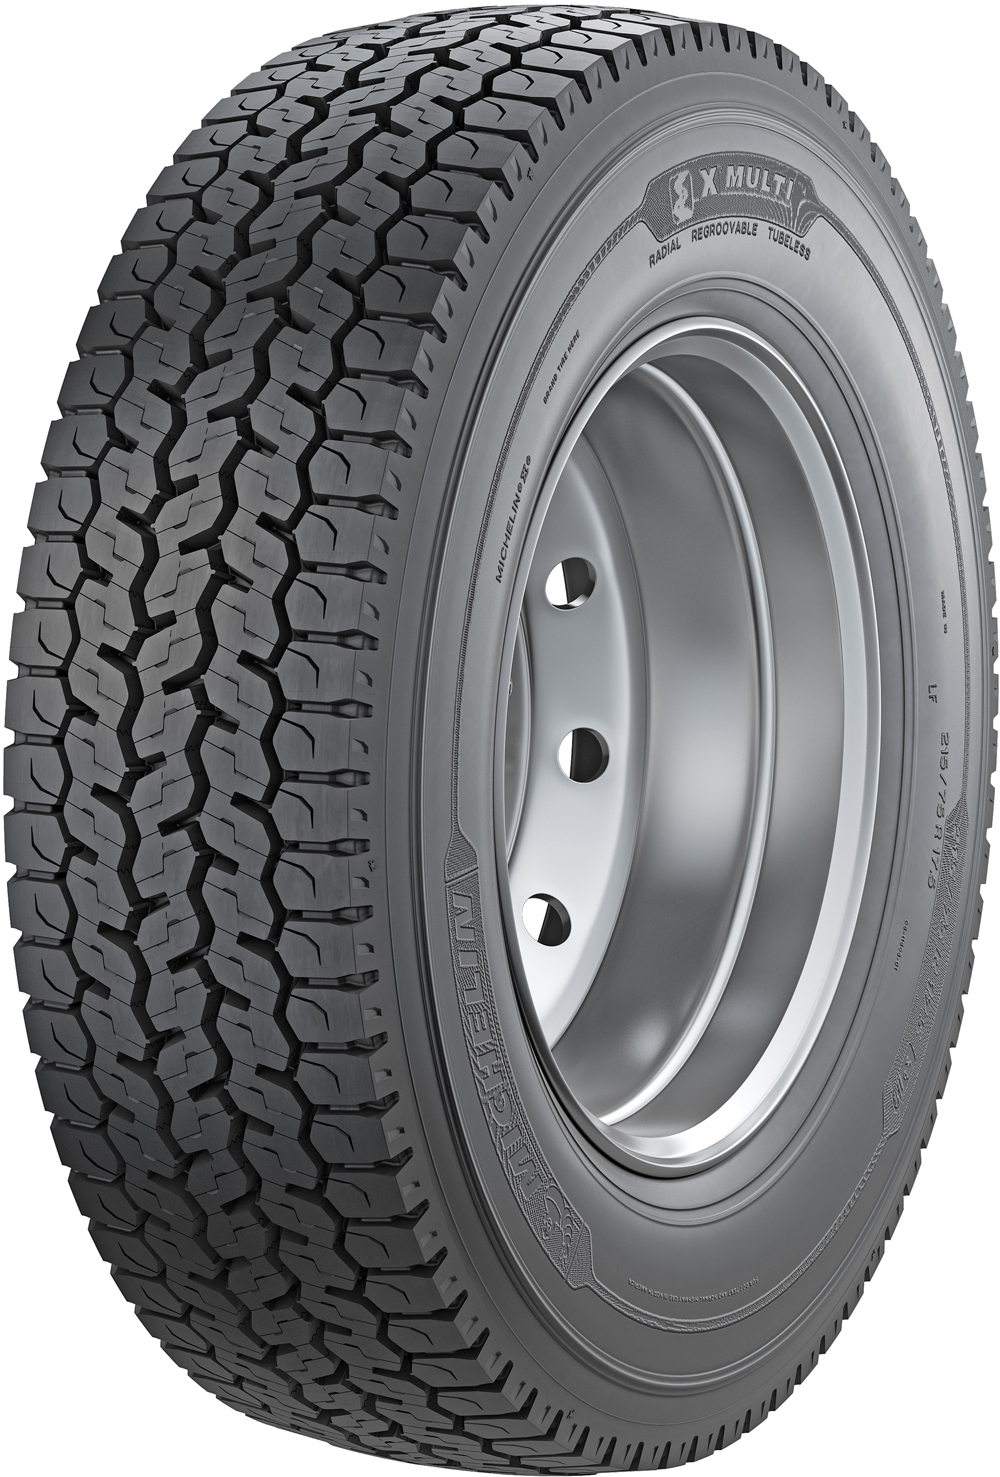 product_type-heavy_tires MICHELIN X MULTI D VG 225/75 R17.5 129M